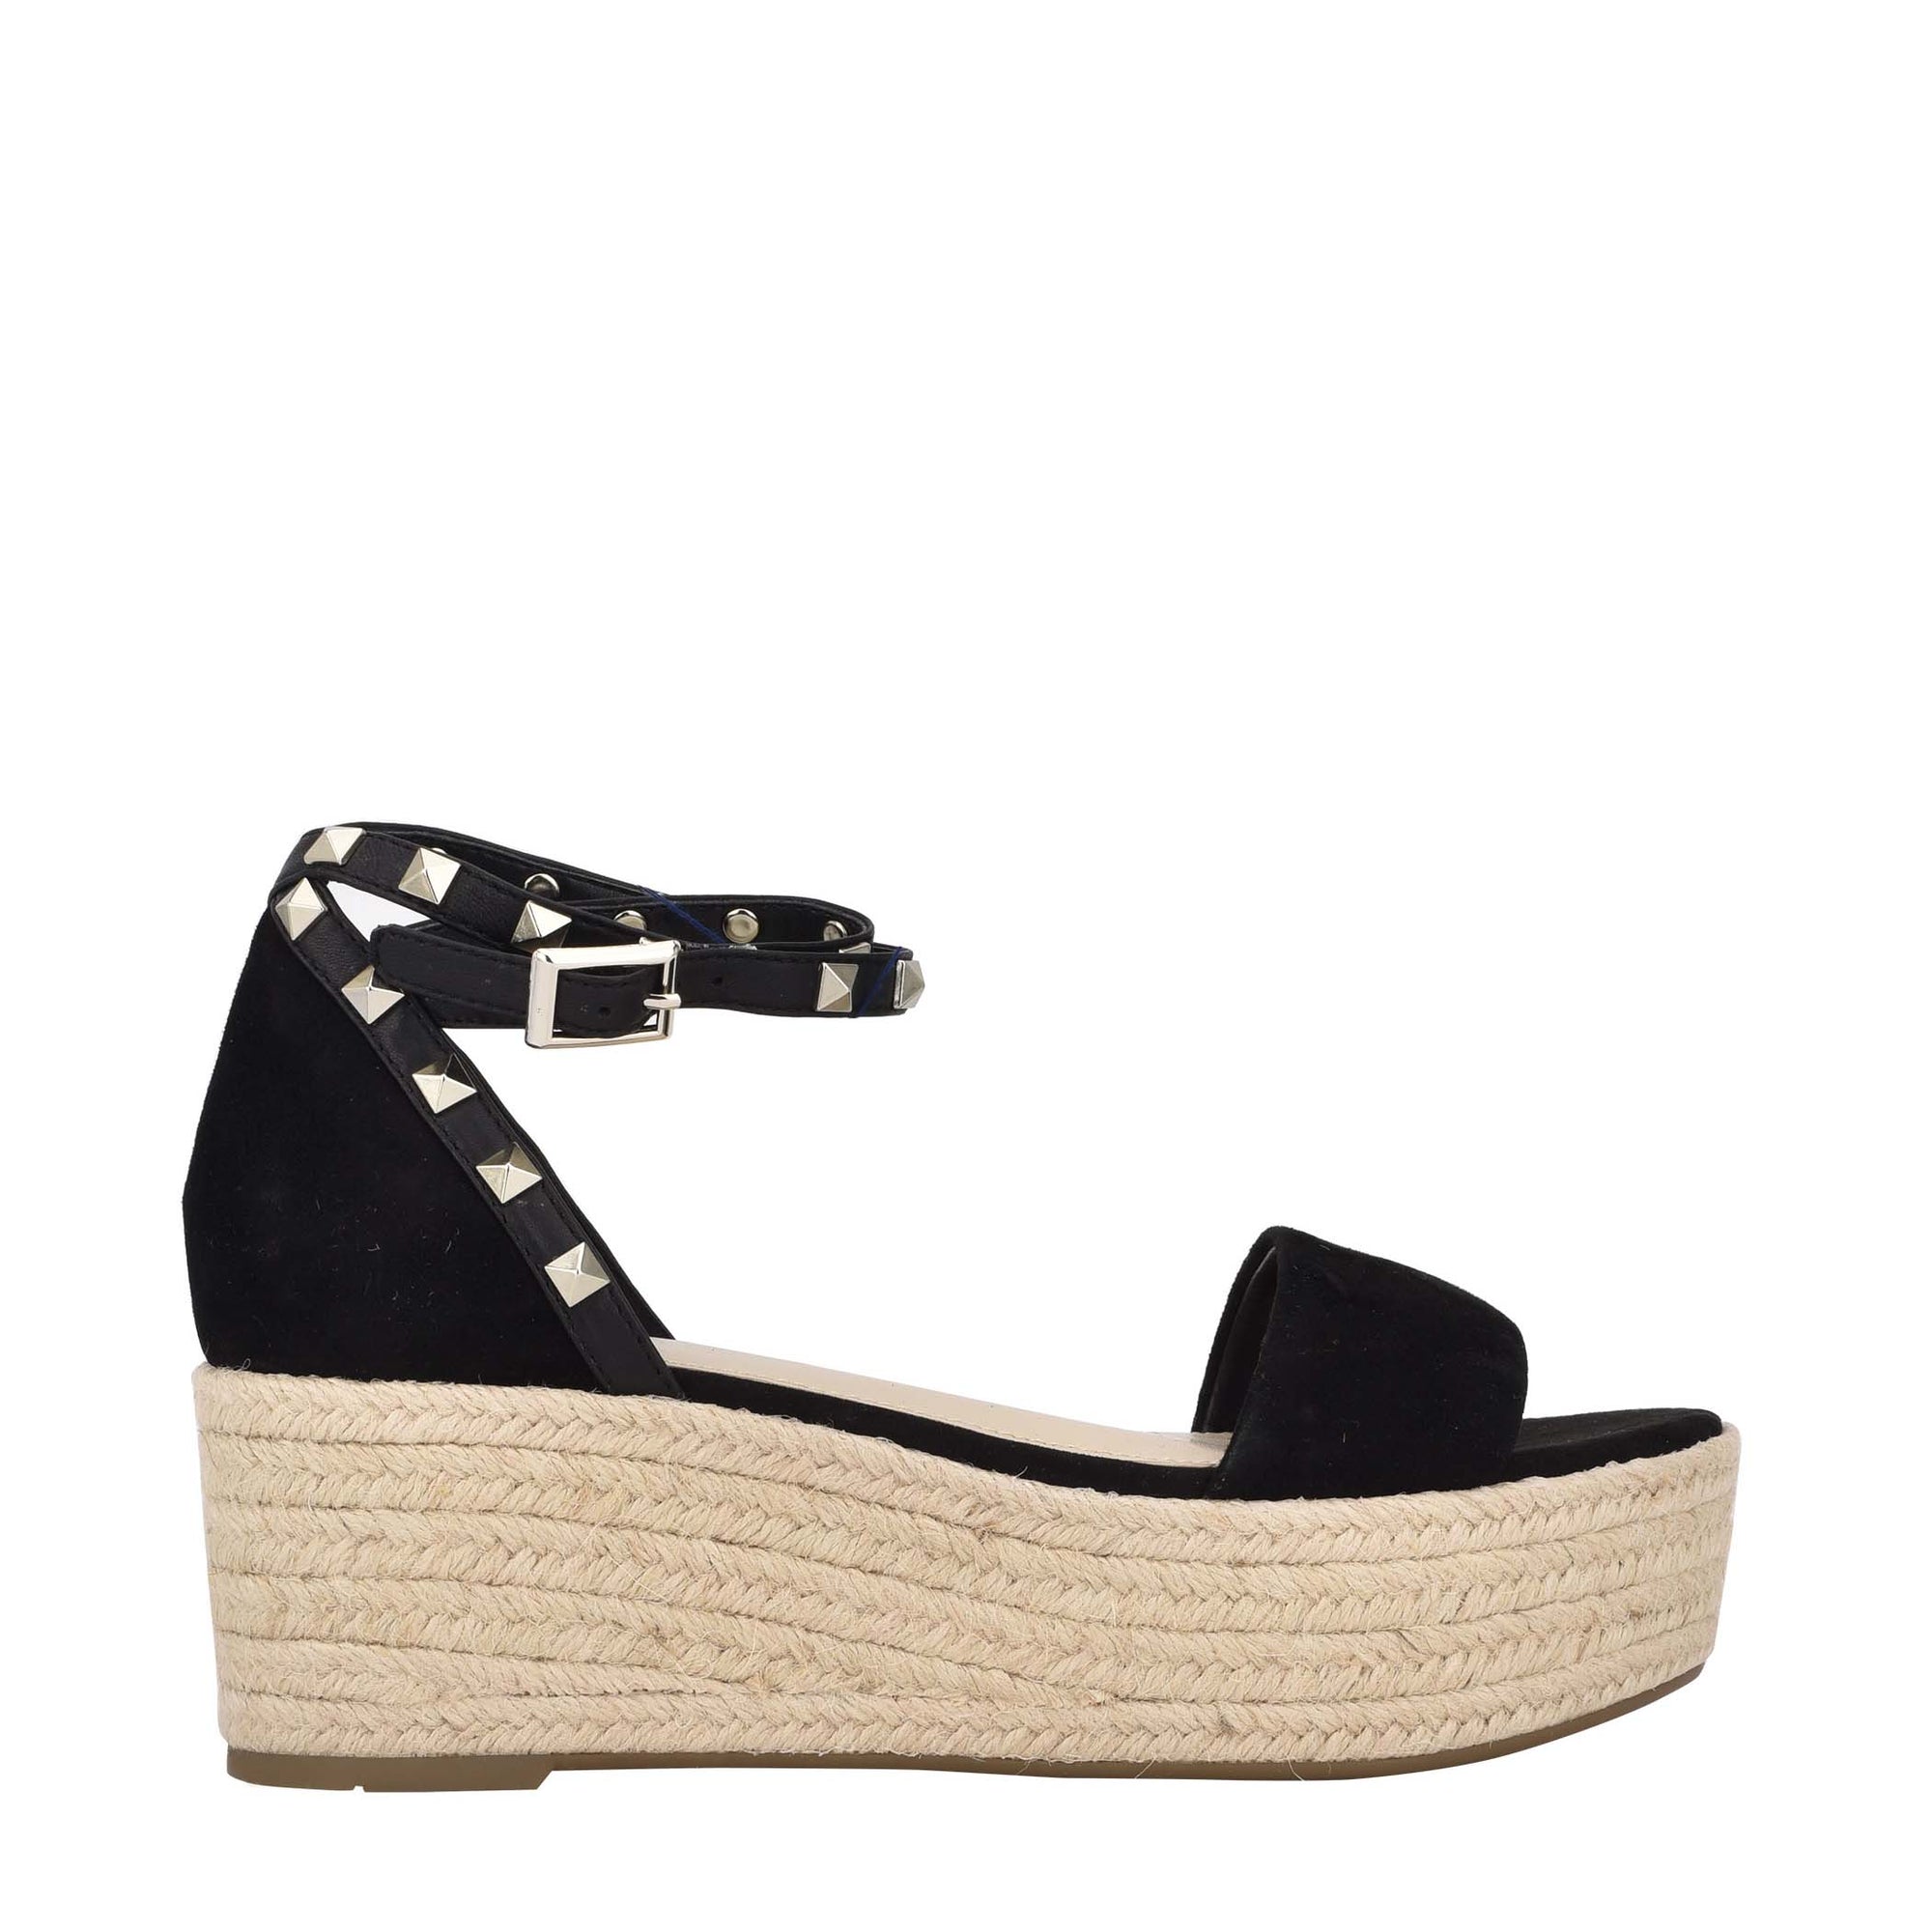 marc fisher wedges with studs